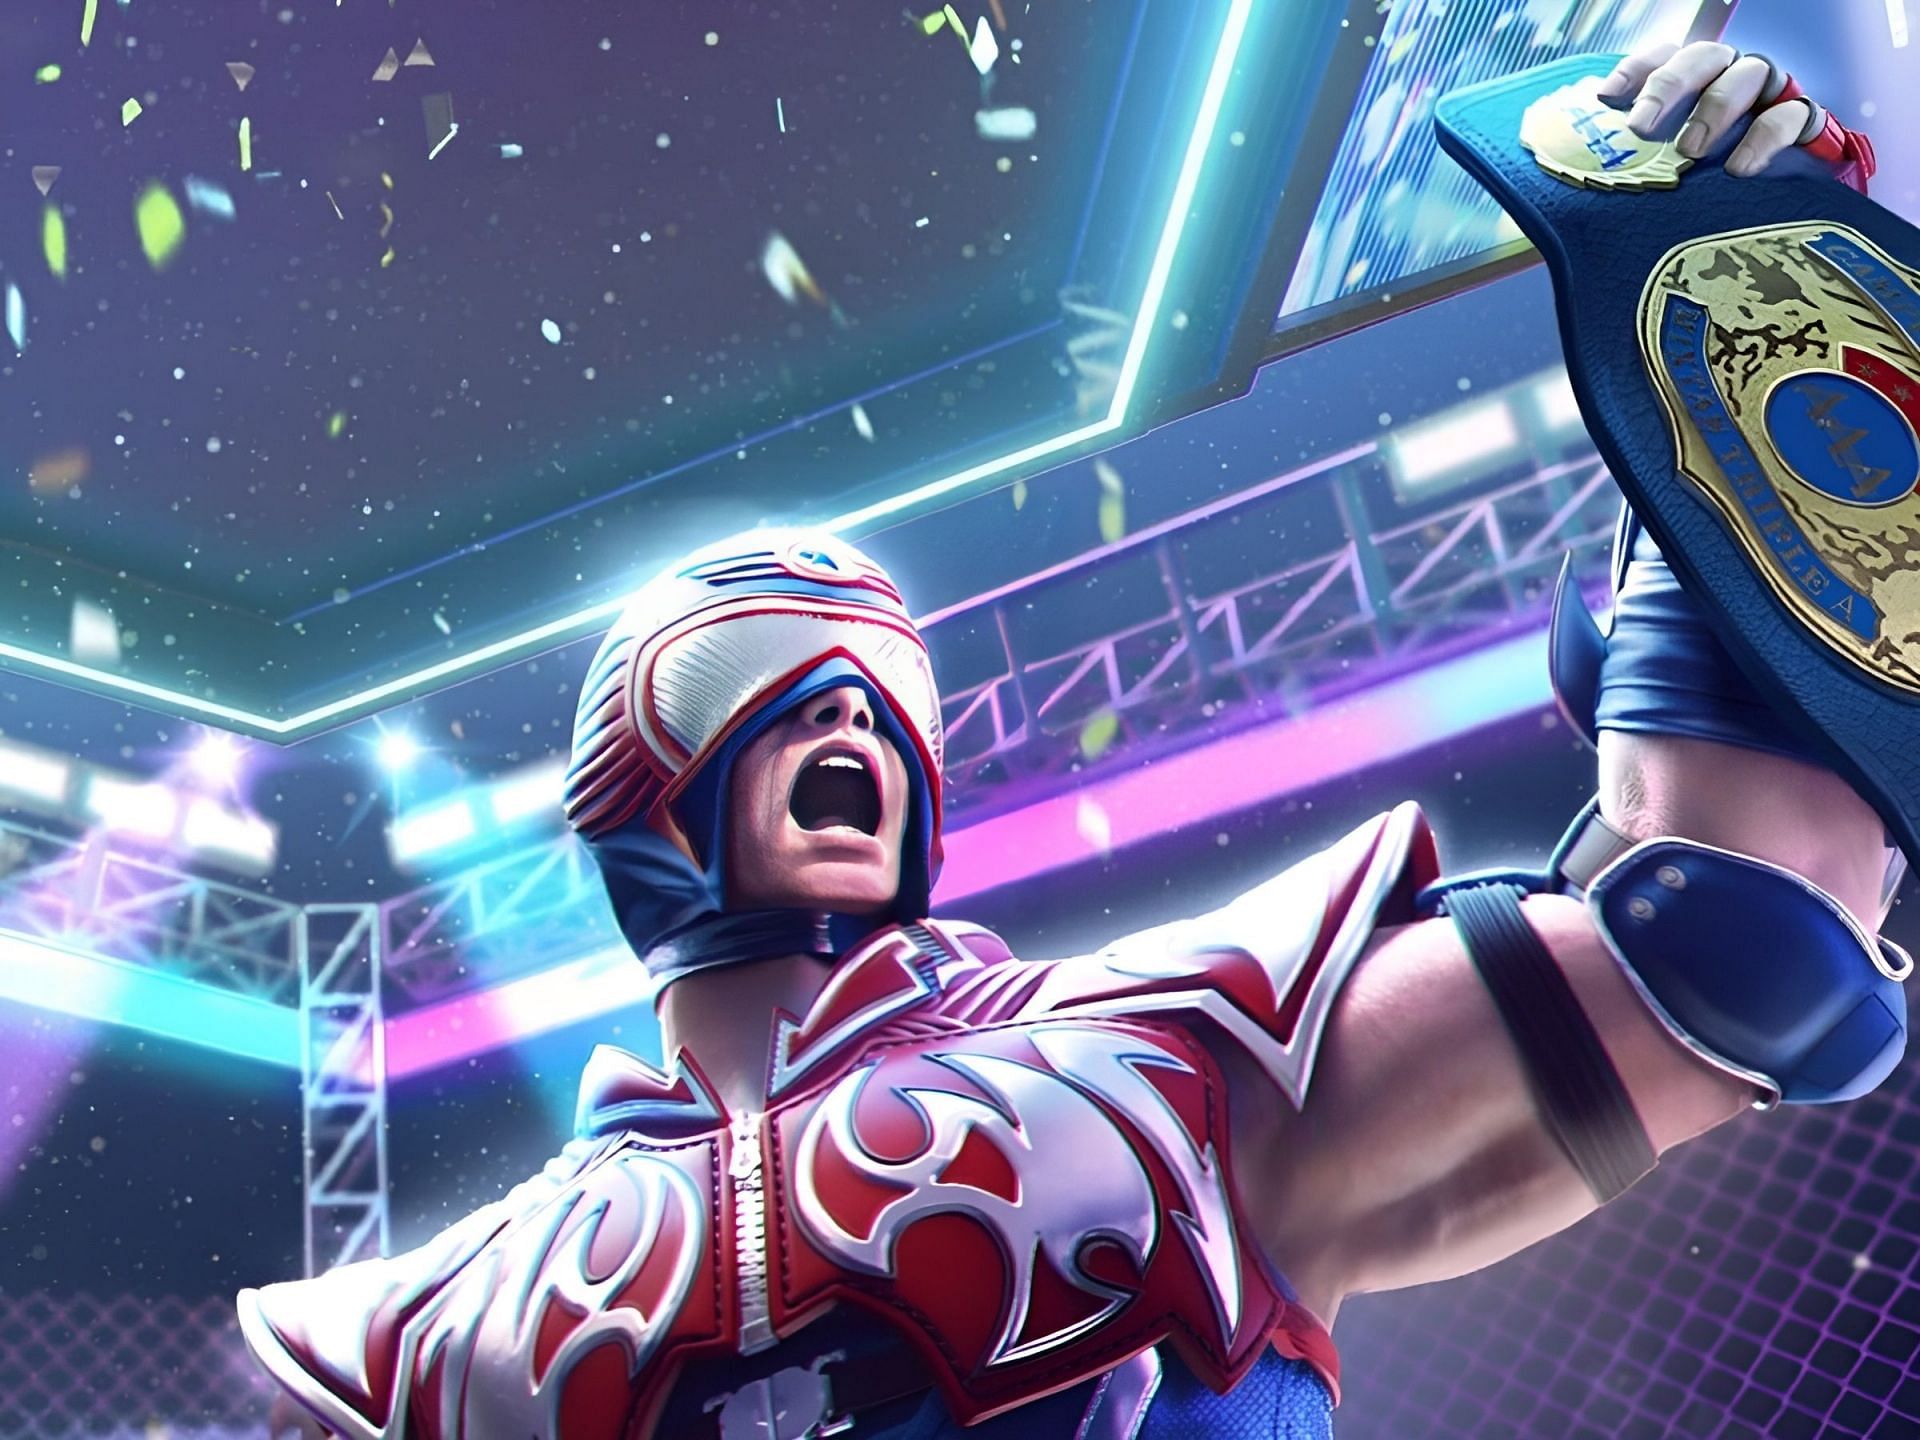 Garena Free Fire new update – OB42 patch notes